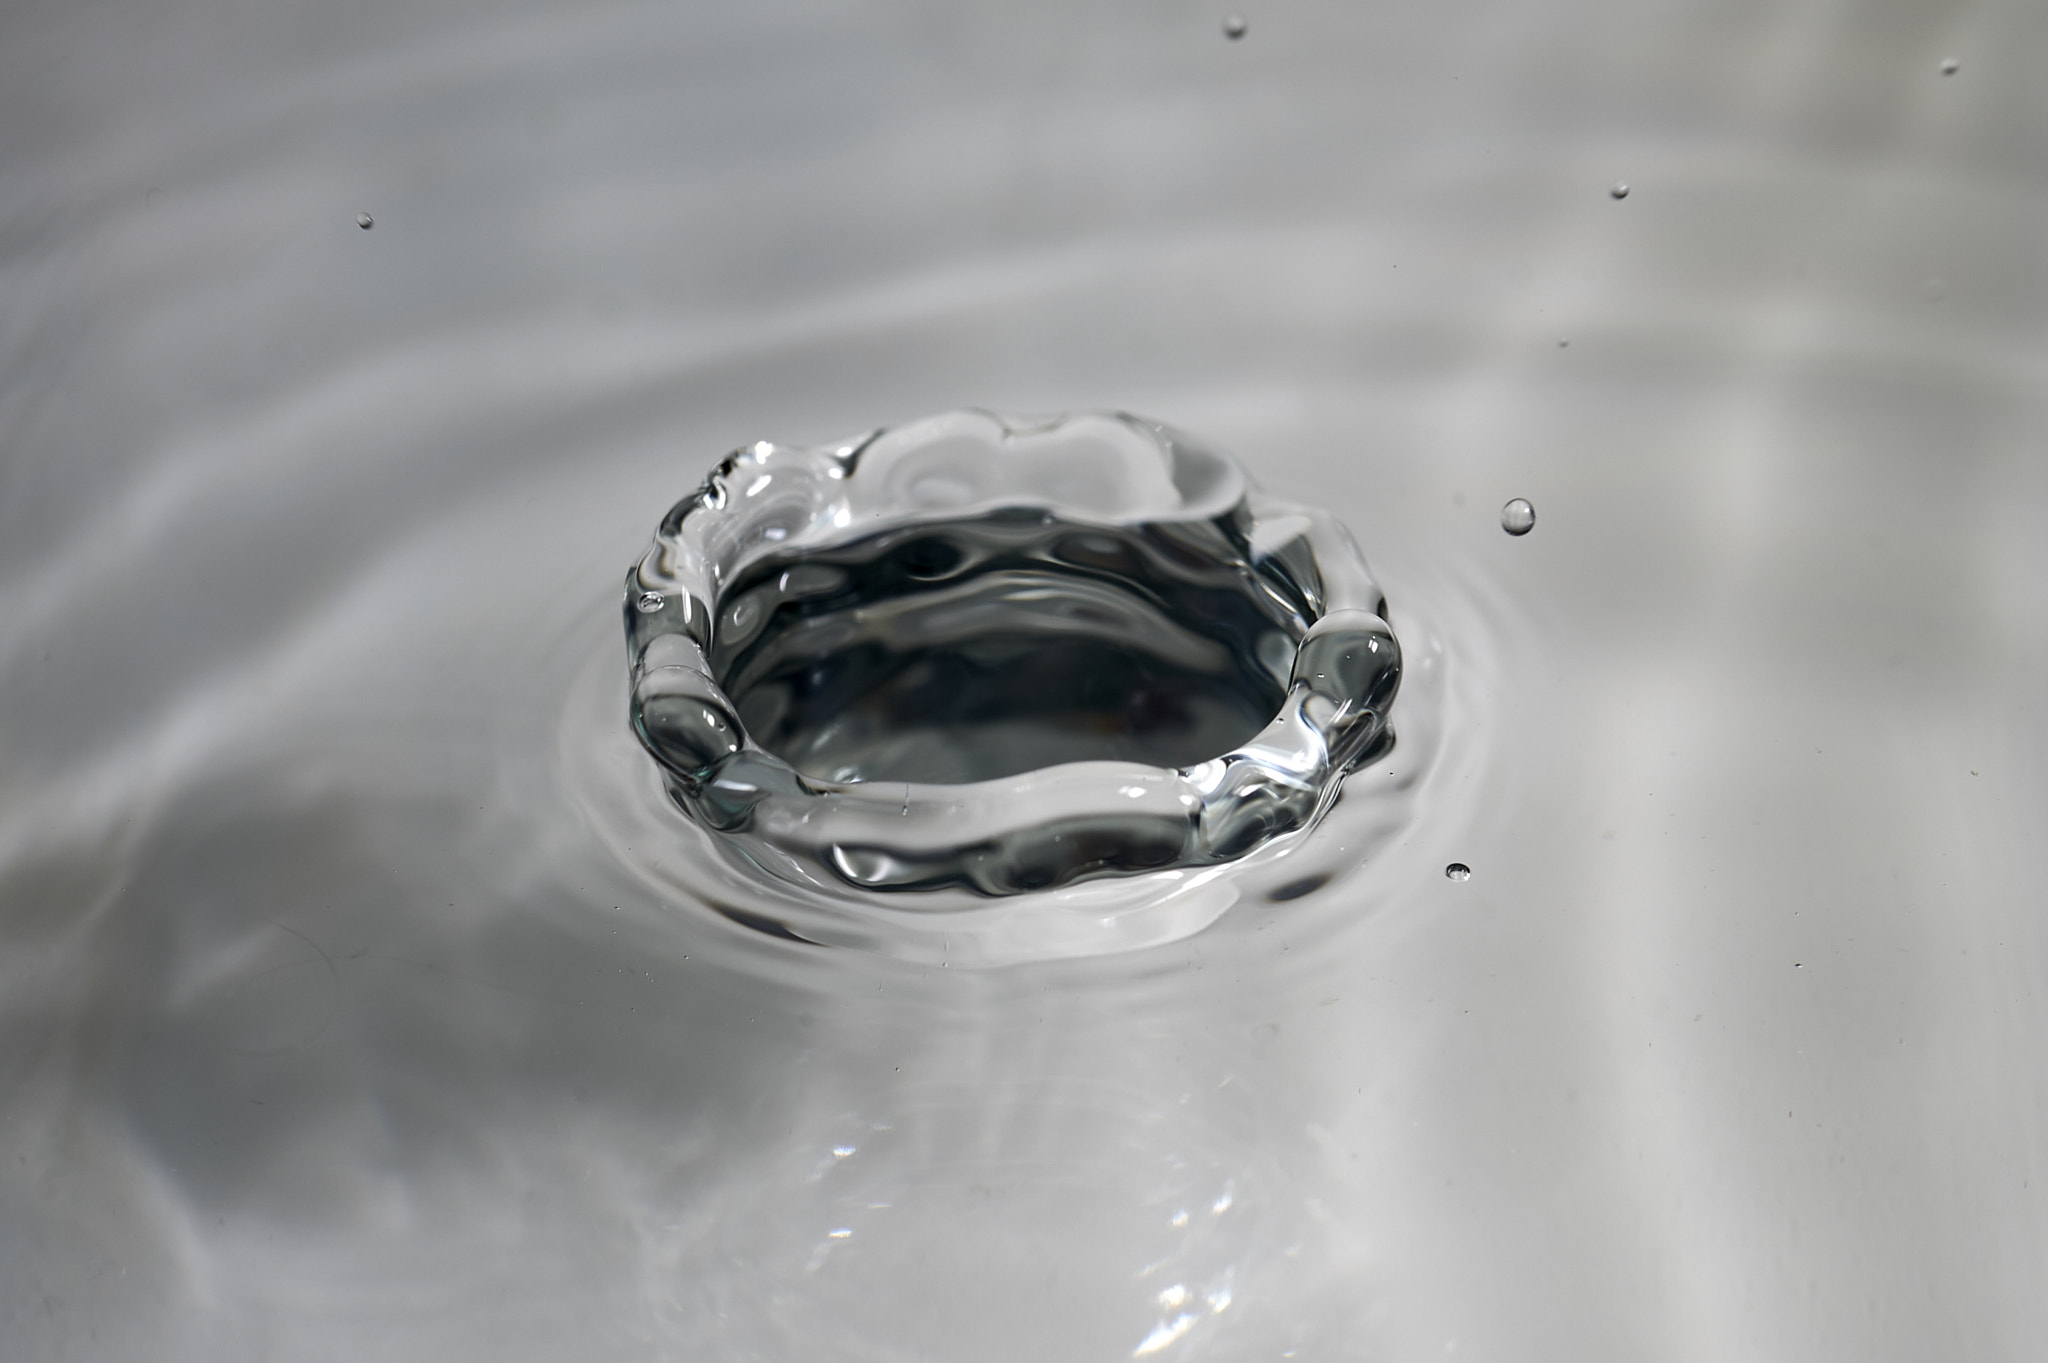 Nikon D700 sample photo. Hole in the water photography